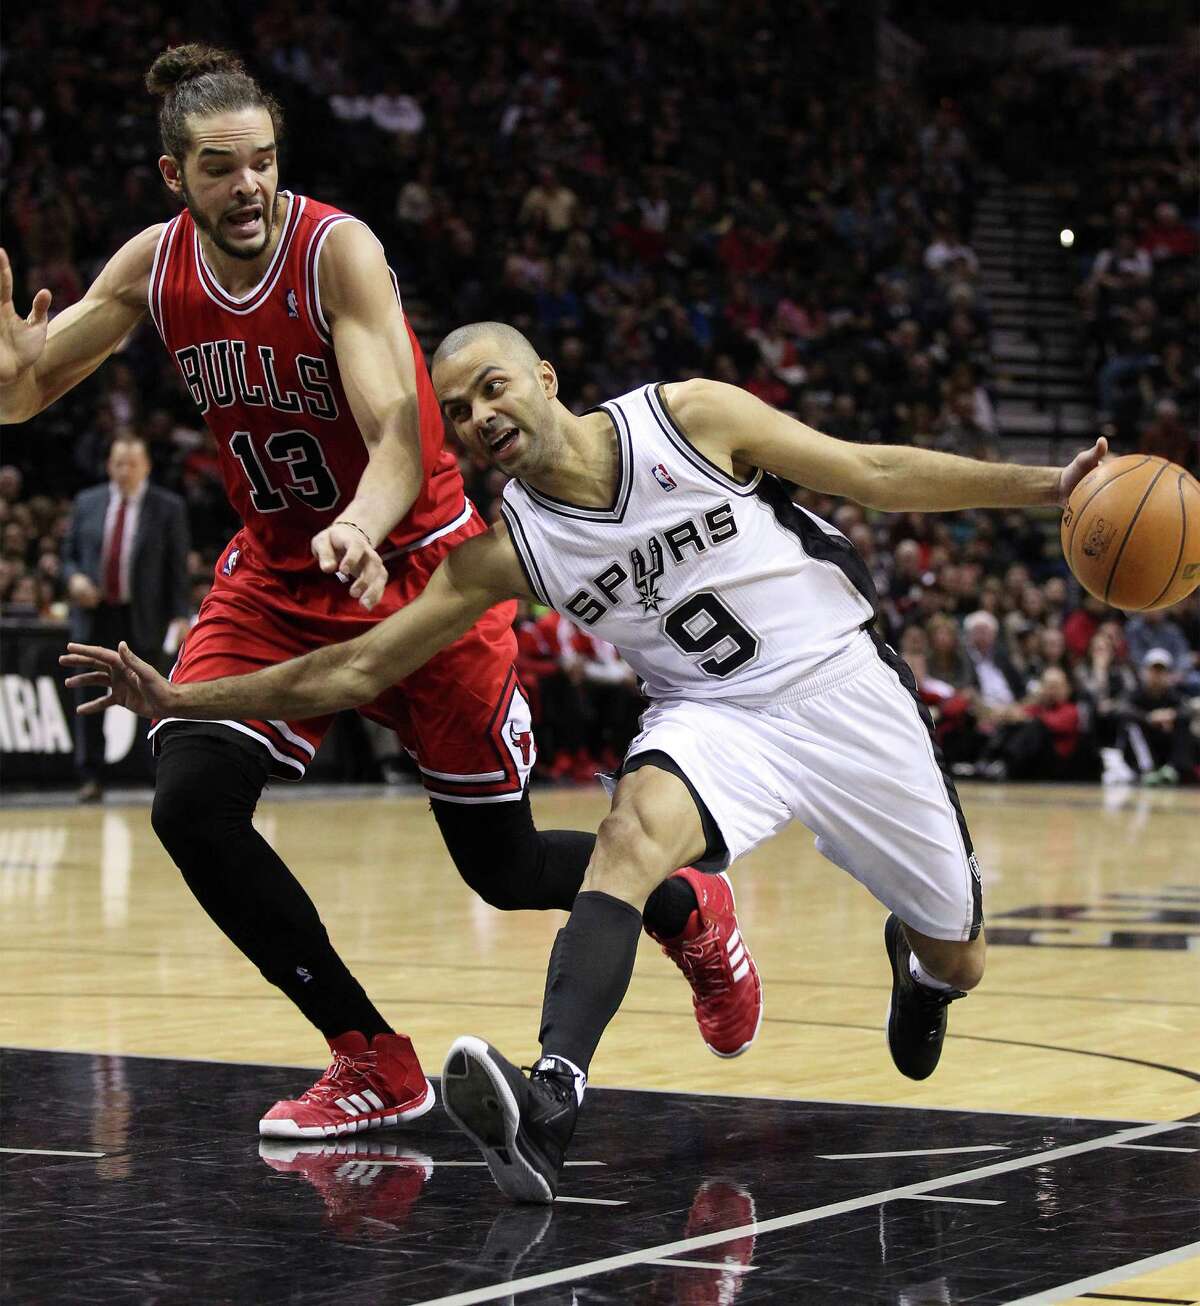 Spurs' Tony Parker (09) attempts to run around Chicago Bulls' Joakim Noah (13) at the AT&T Center on Wednesday, Jan. 29, 2014.